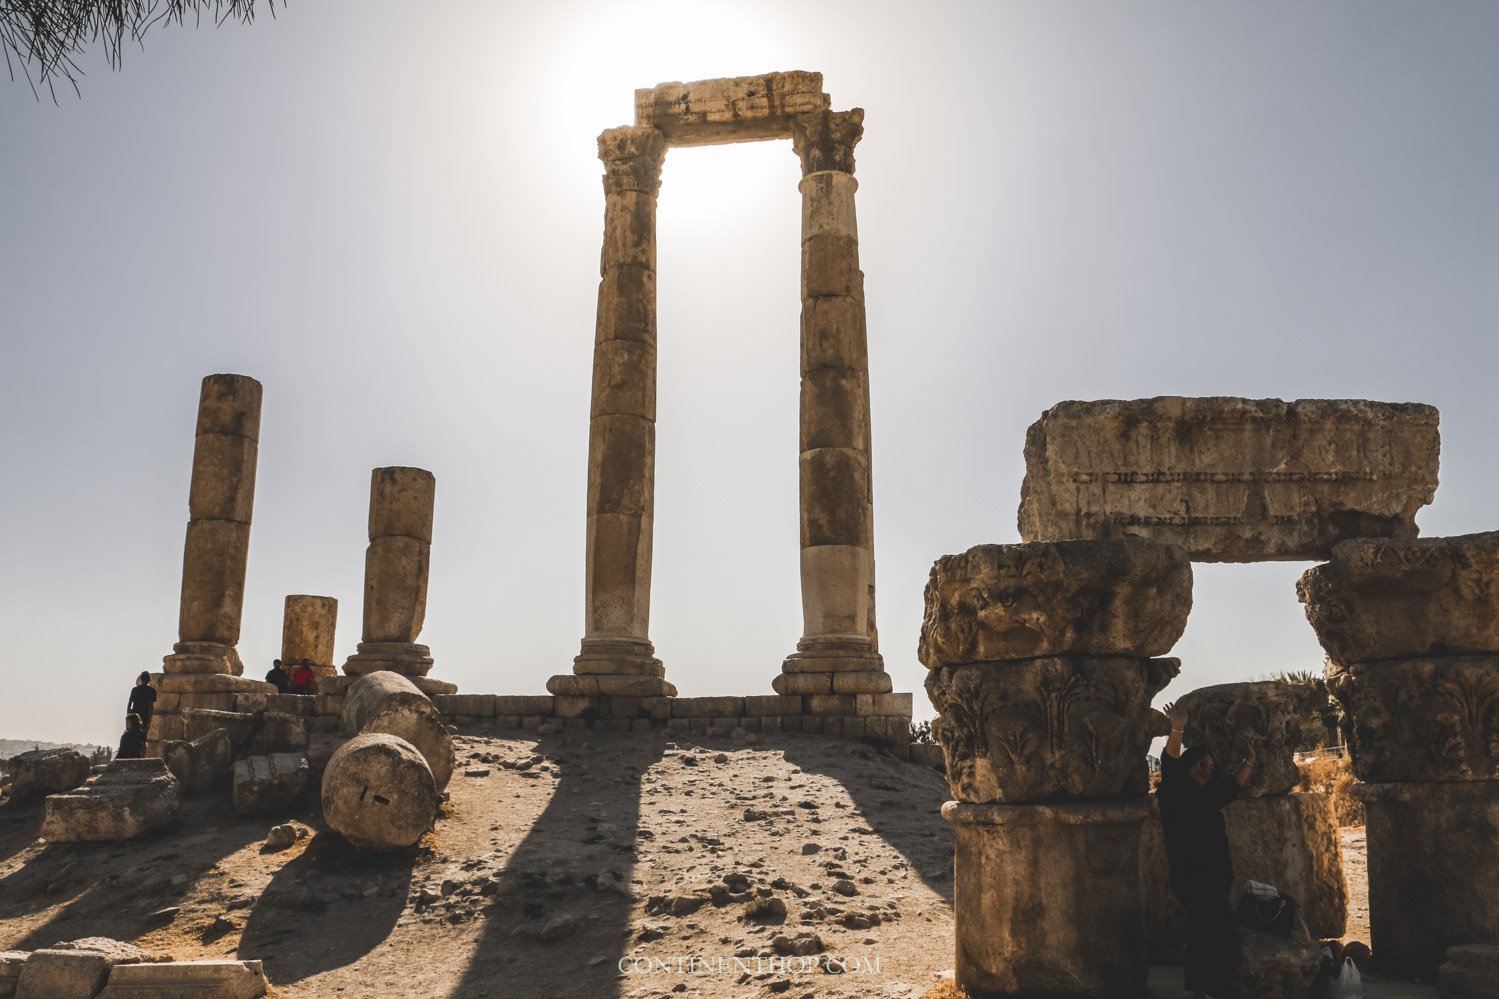 The citadel in Amman - things to do in Amman